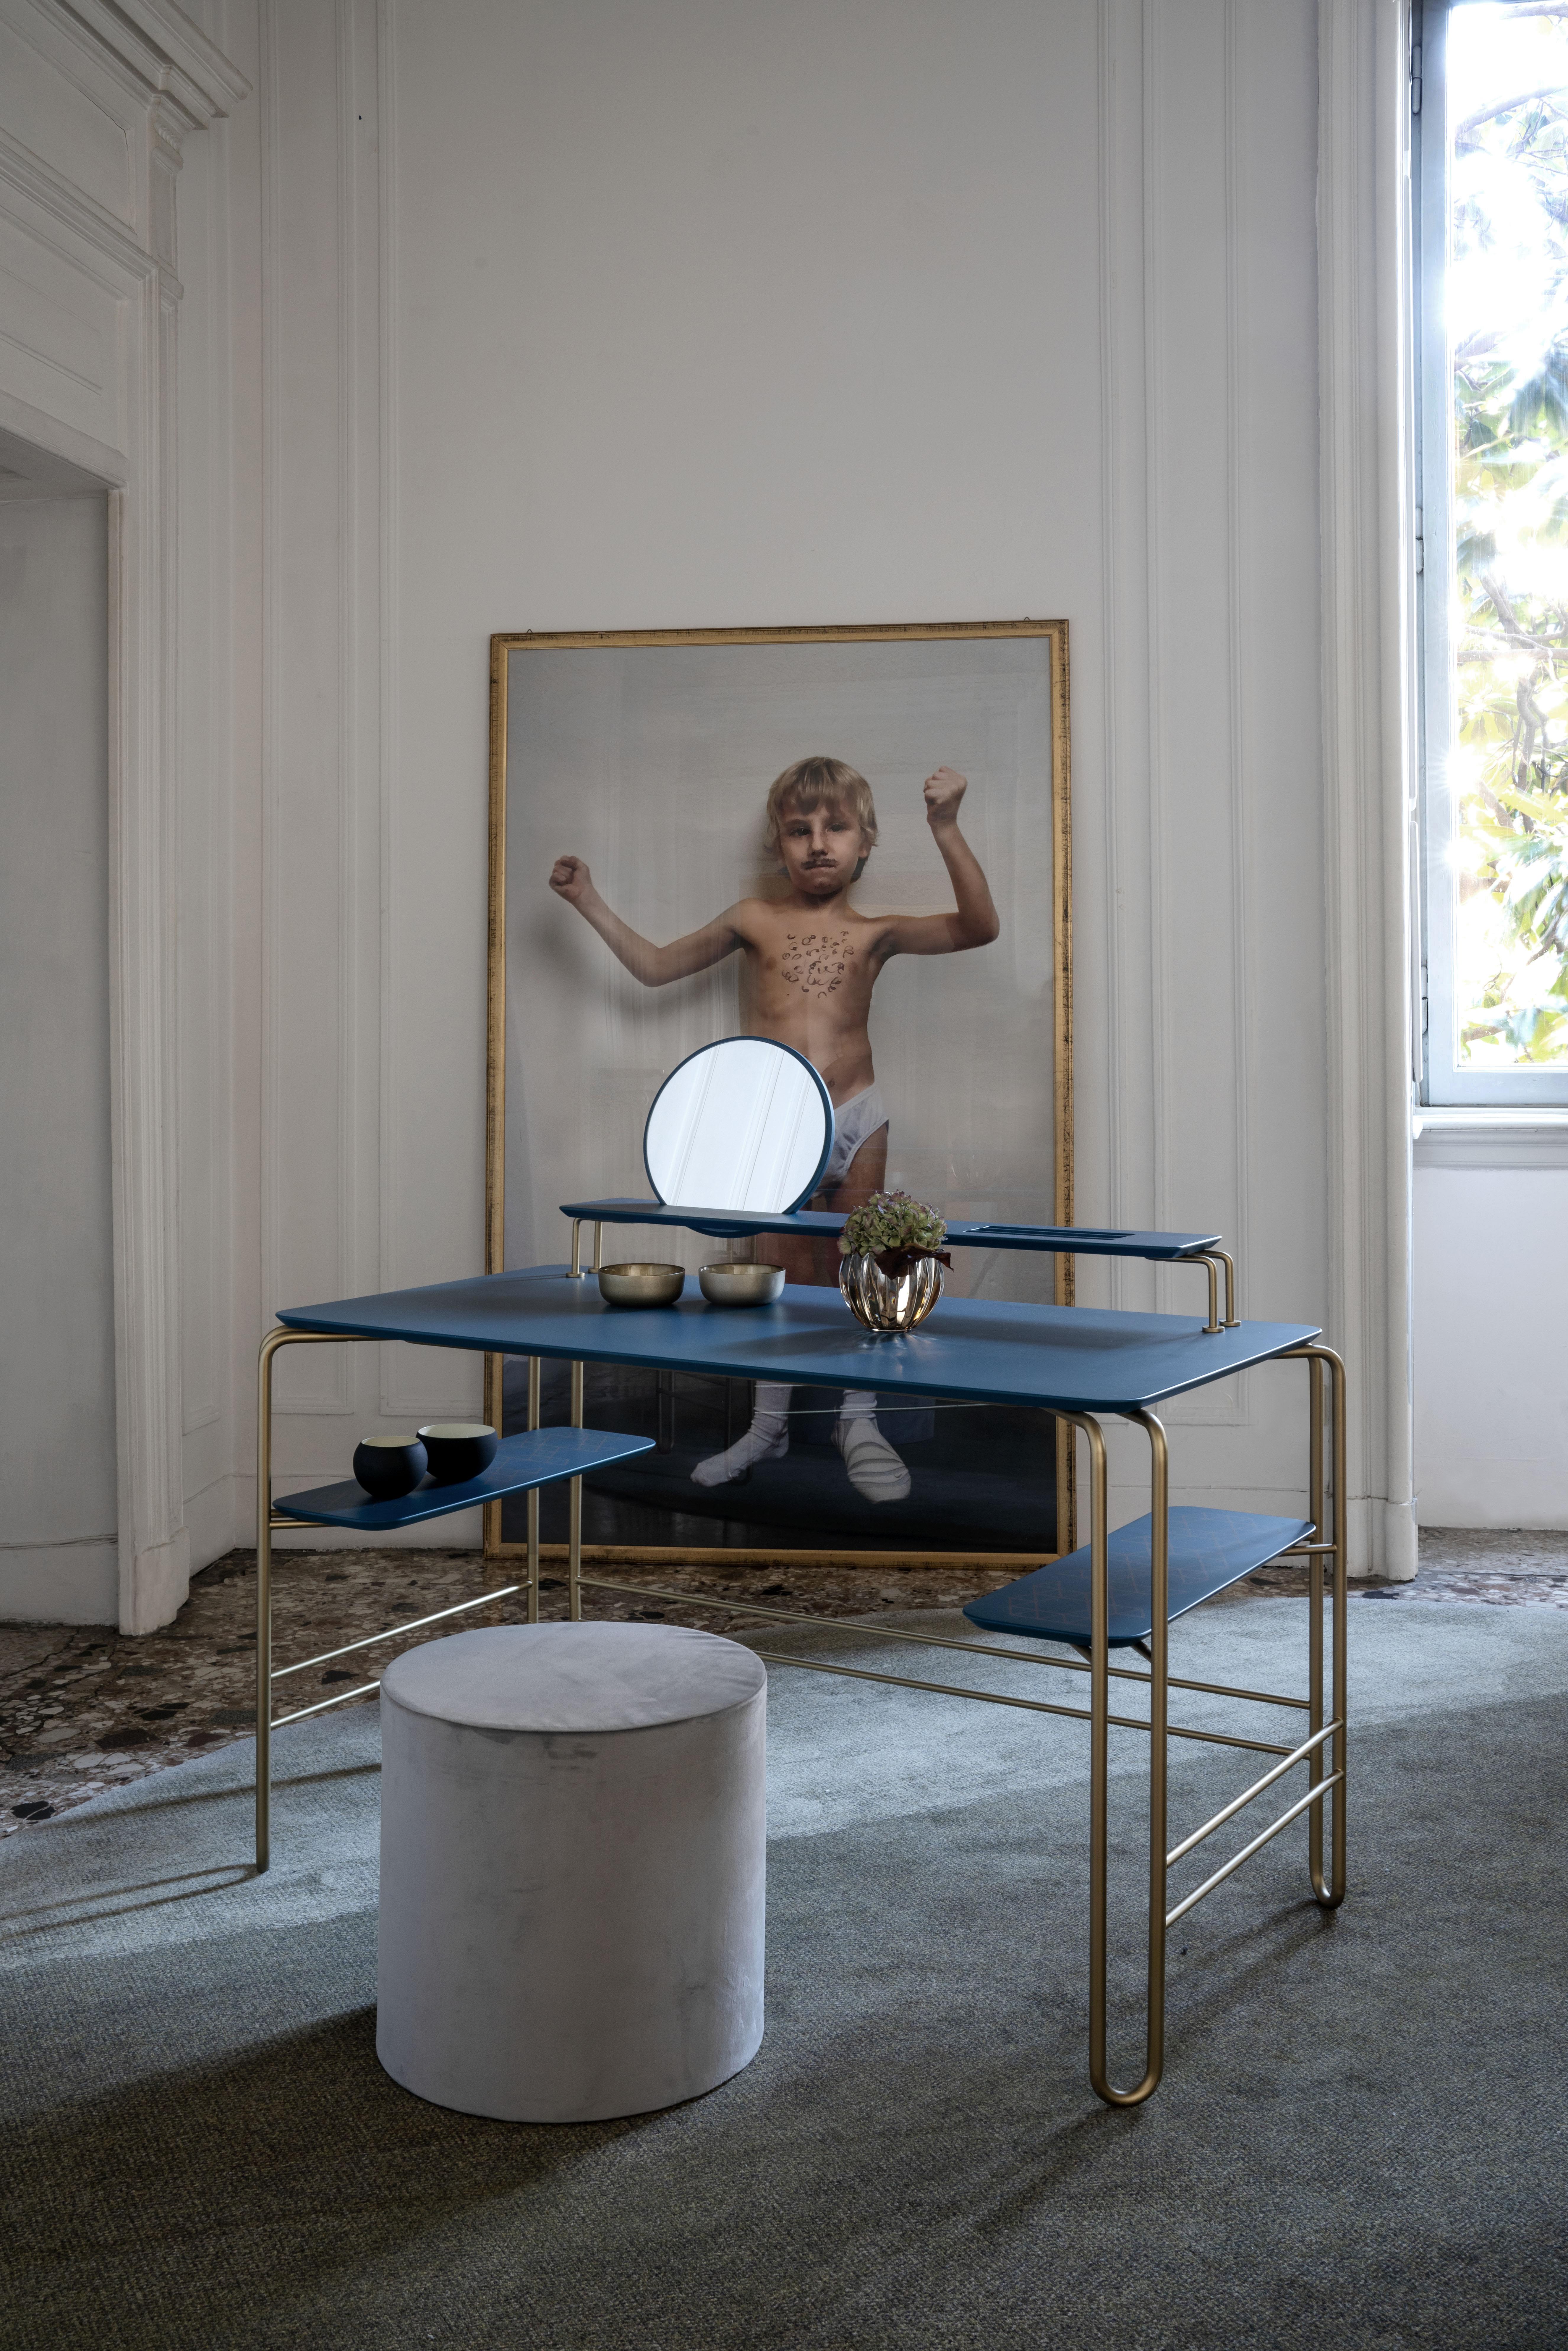 Blue grimilde console table by Mentemano
Dimensions: W 120 x D 65 x H 88 cm
Materials: Steel, wood, mirror 
Other colors available.

Console desk made of bended coated steel defined by clear and minimal lines with lacquered wood shelves. The